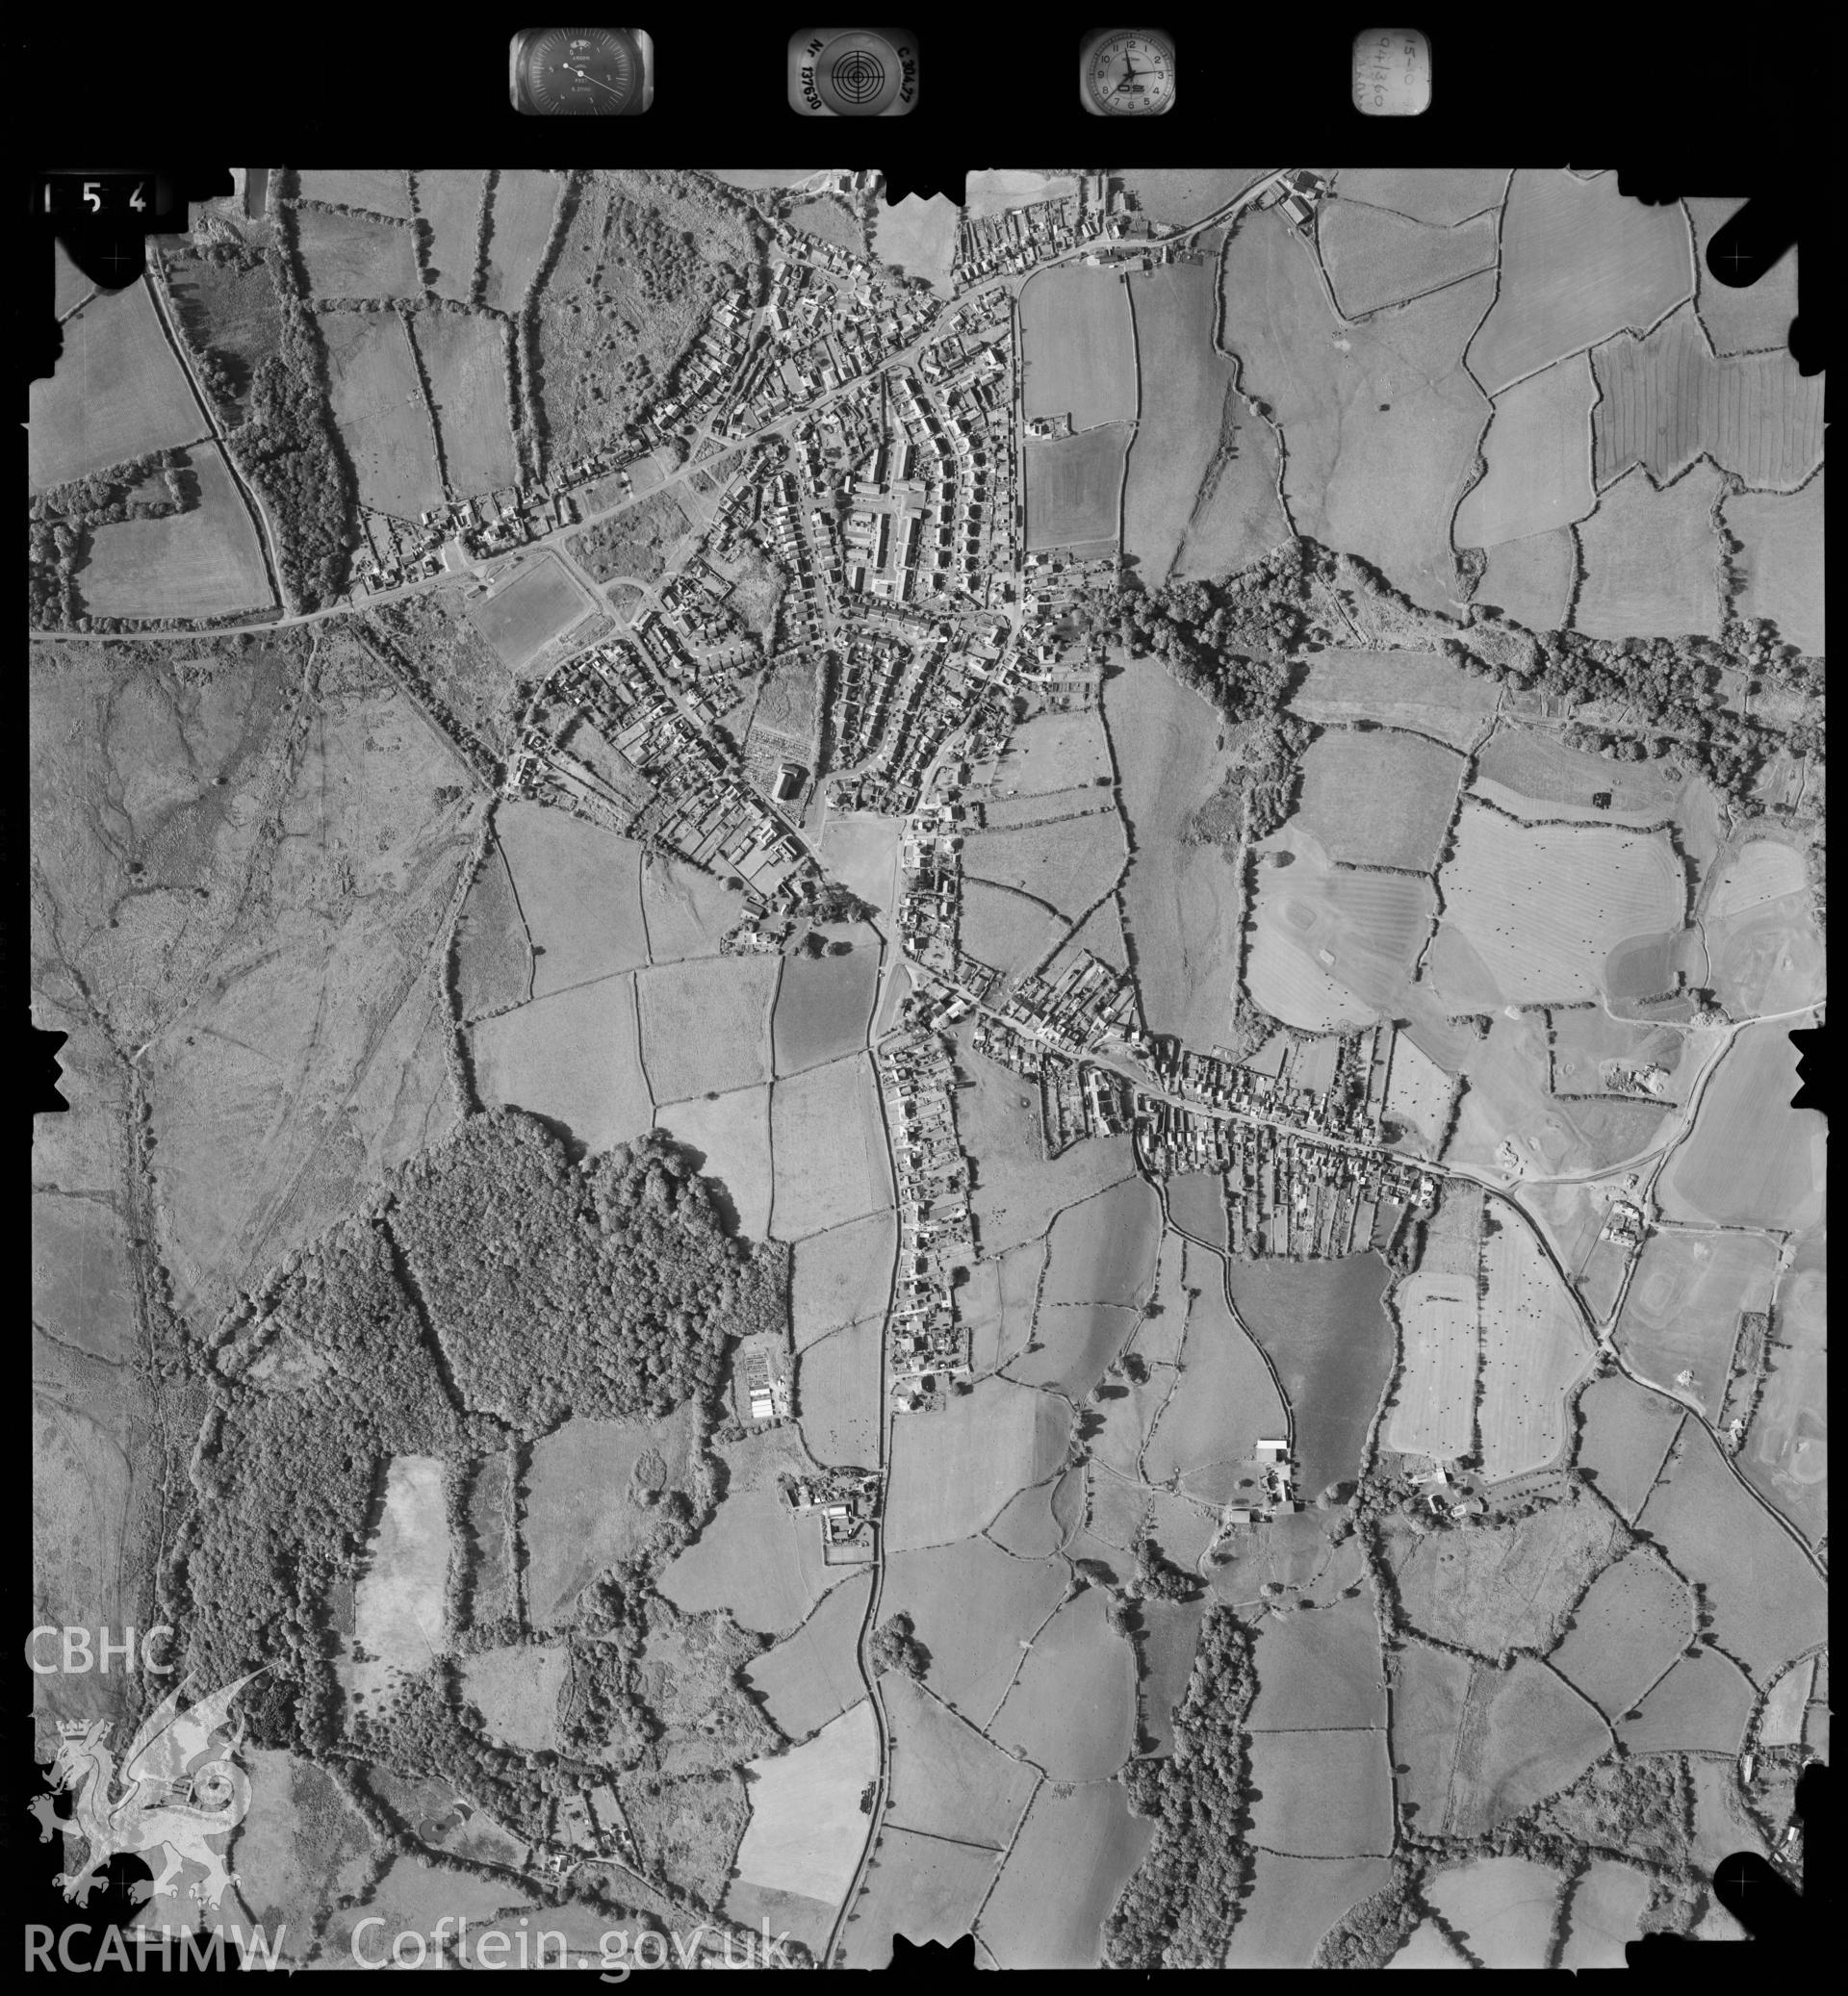 Digitized copy of an aerial photograph showingThree Crosses area, Glamorgan, taken by Ordnance Survey, 1994.